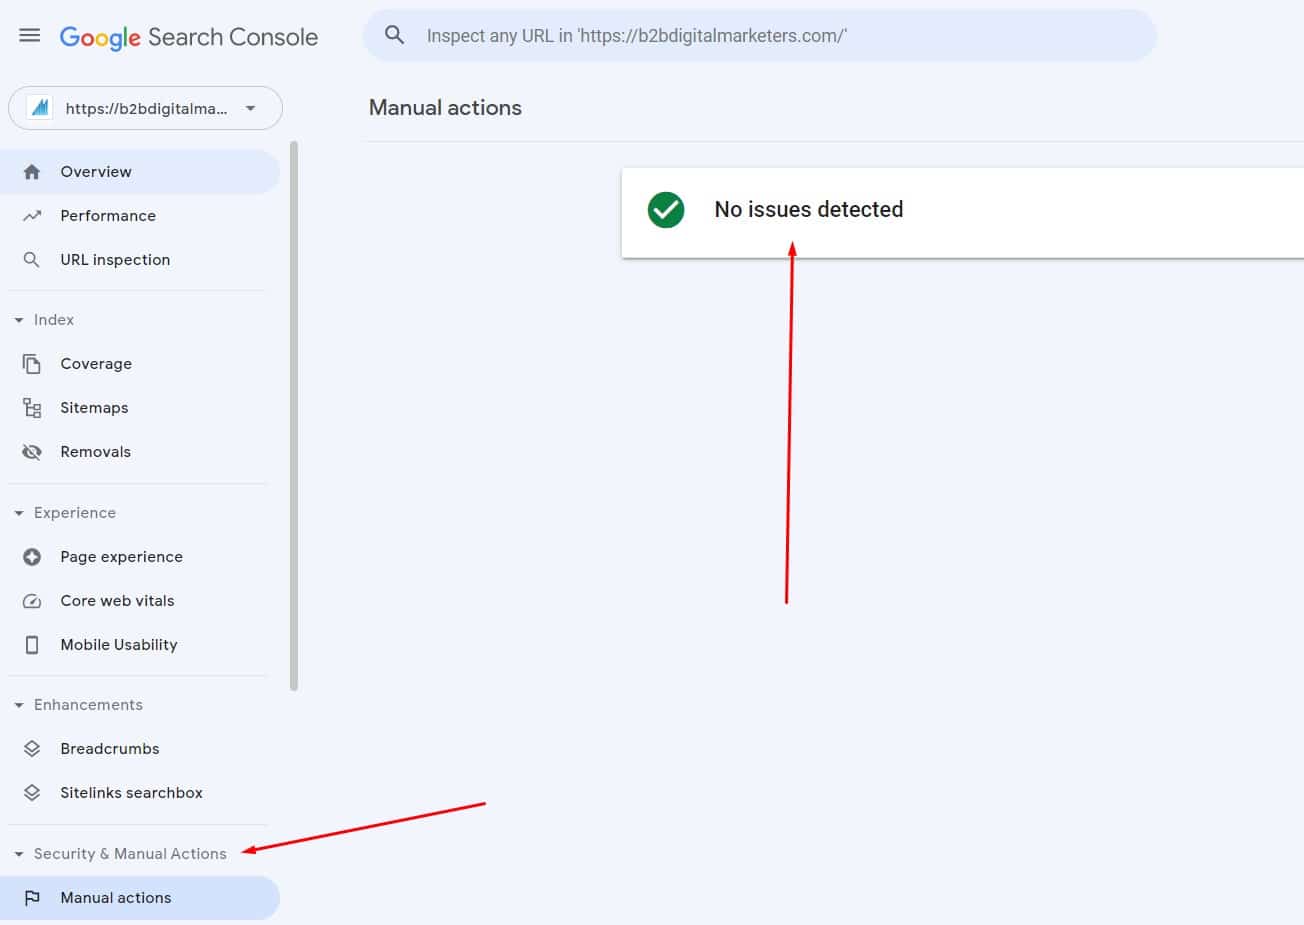 google search consolte information about manual actions on your website